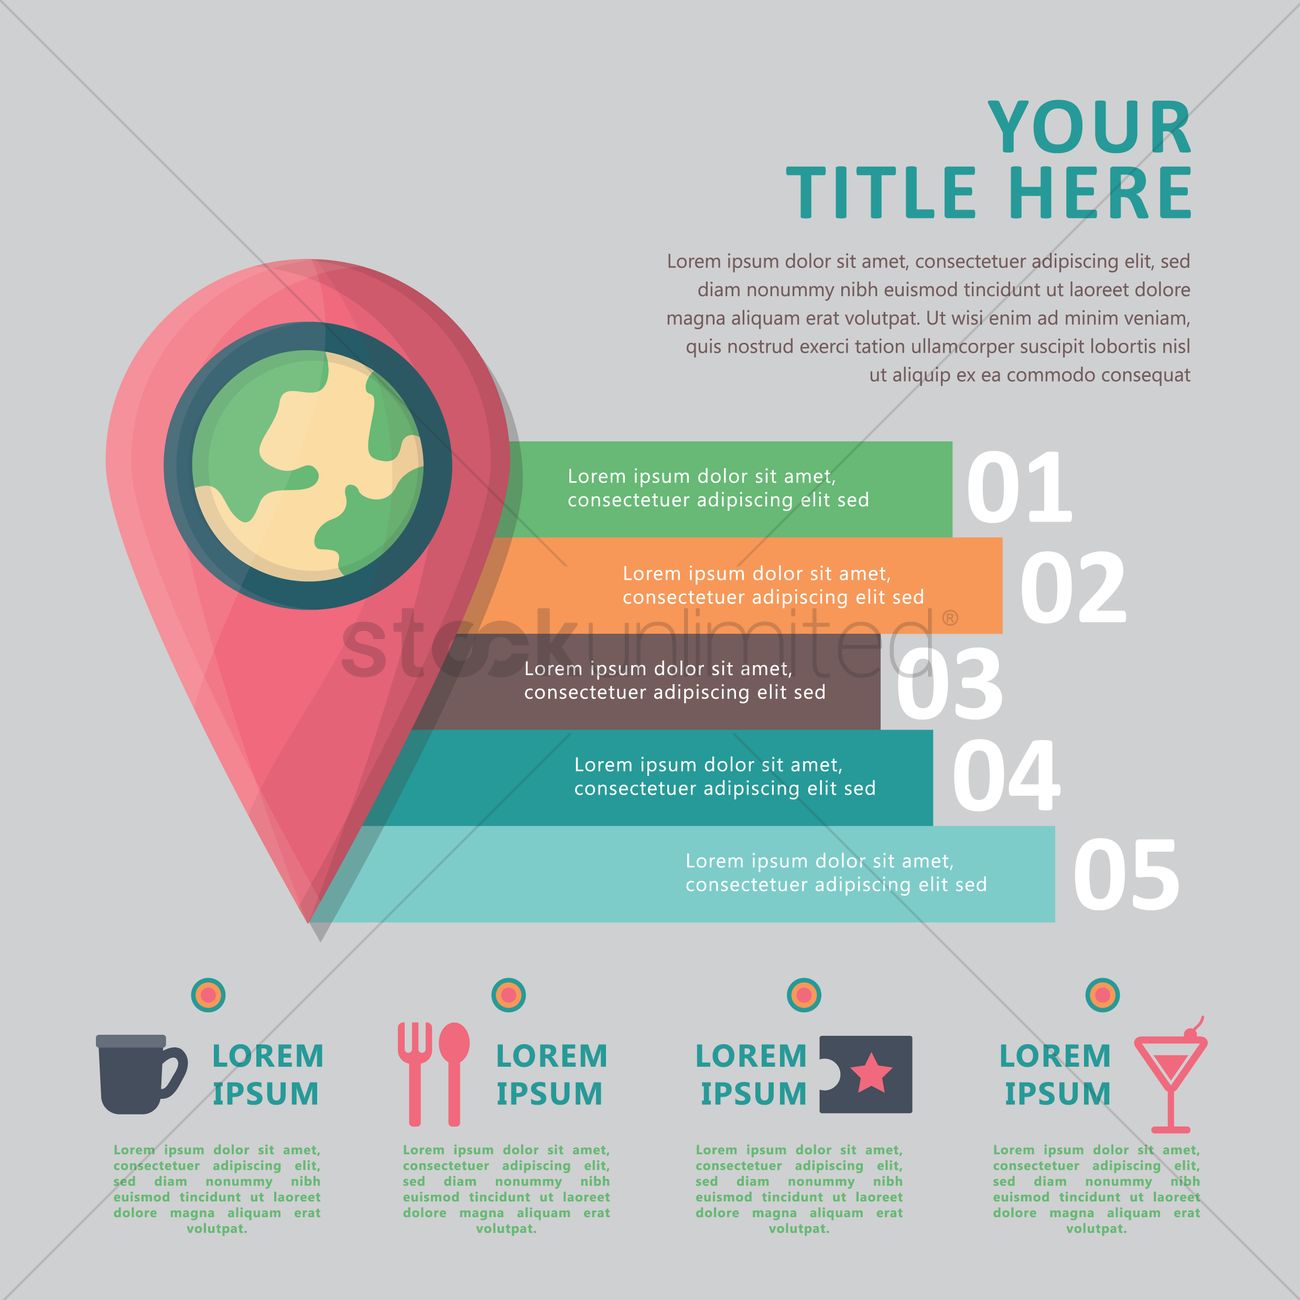 Free Location Infographic Templates | Customize & Download | Visme